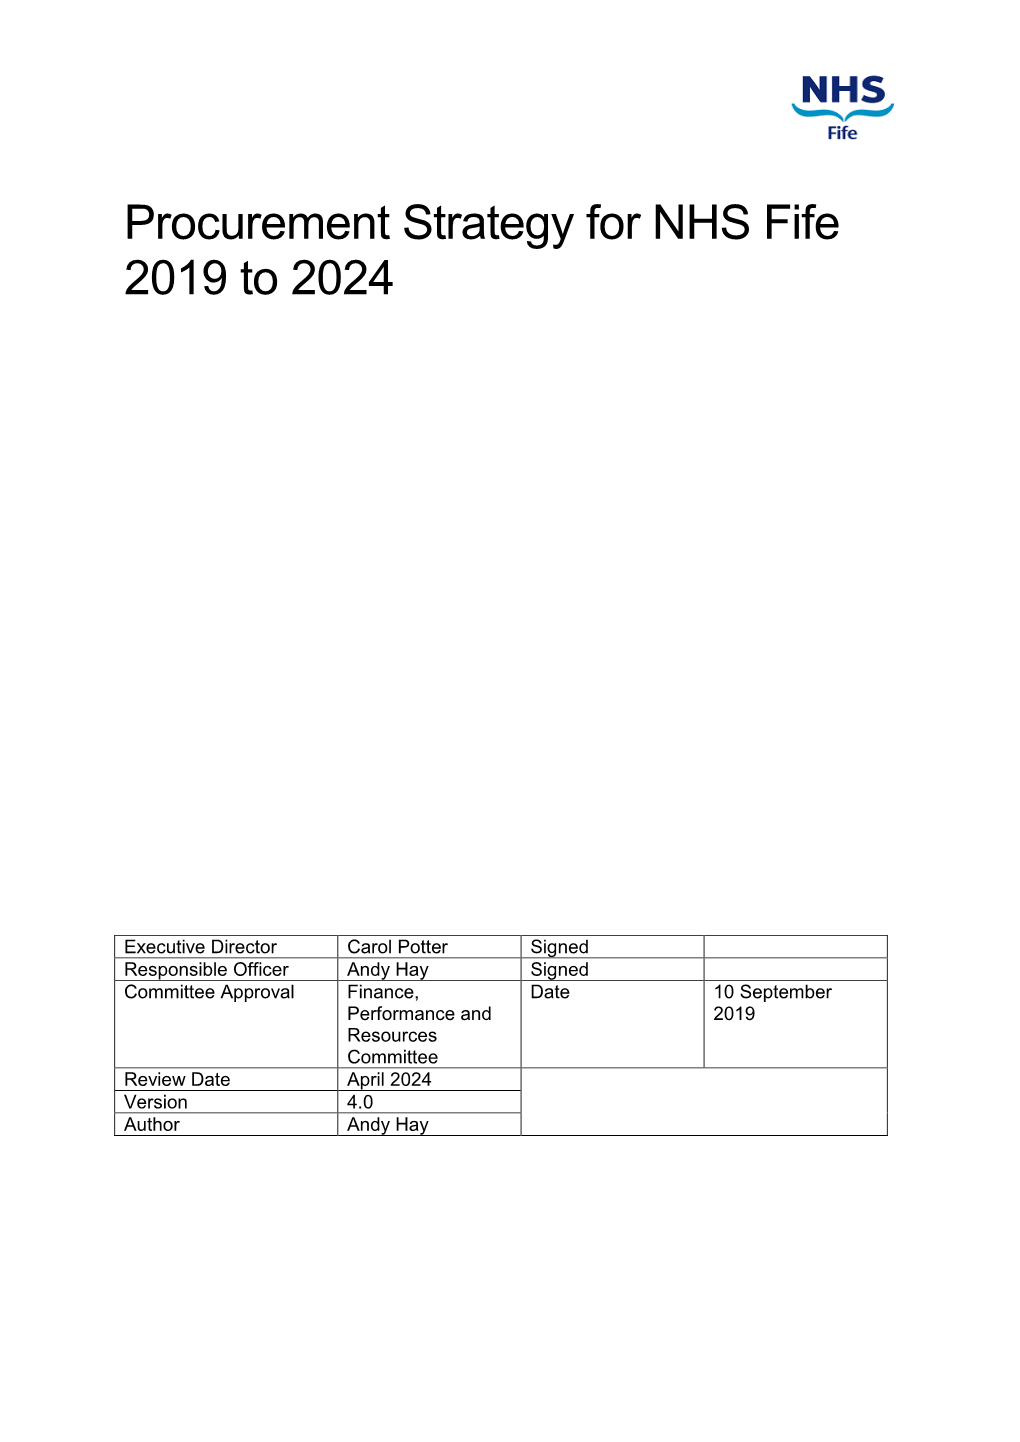 Procurement Strategy for NHS Fife 2019 to 2024